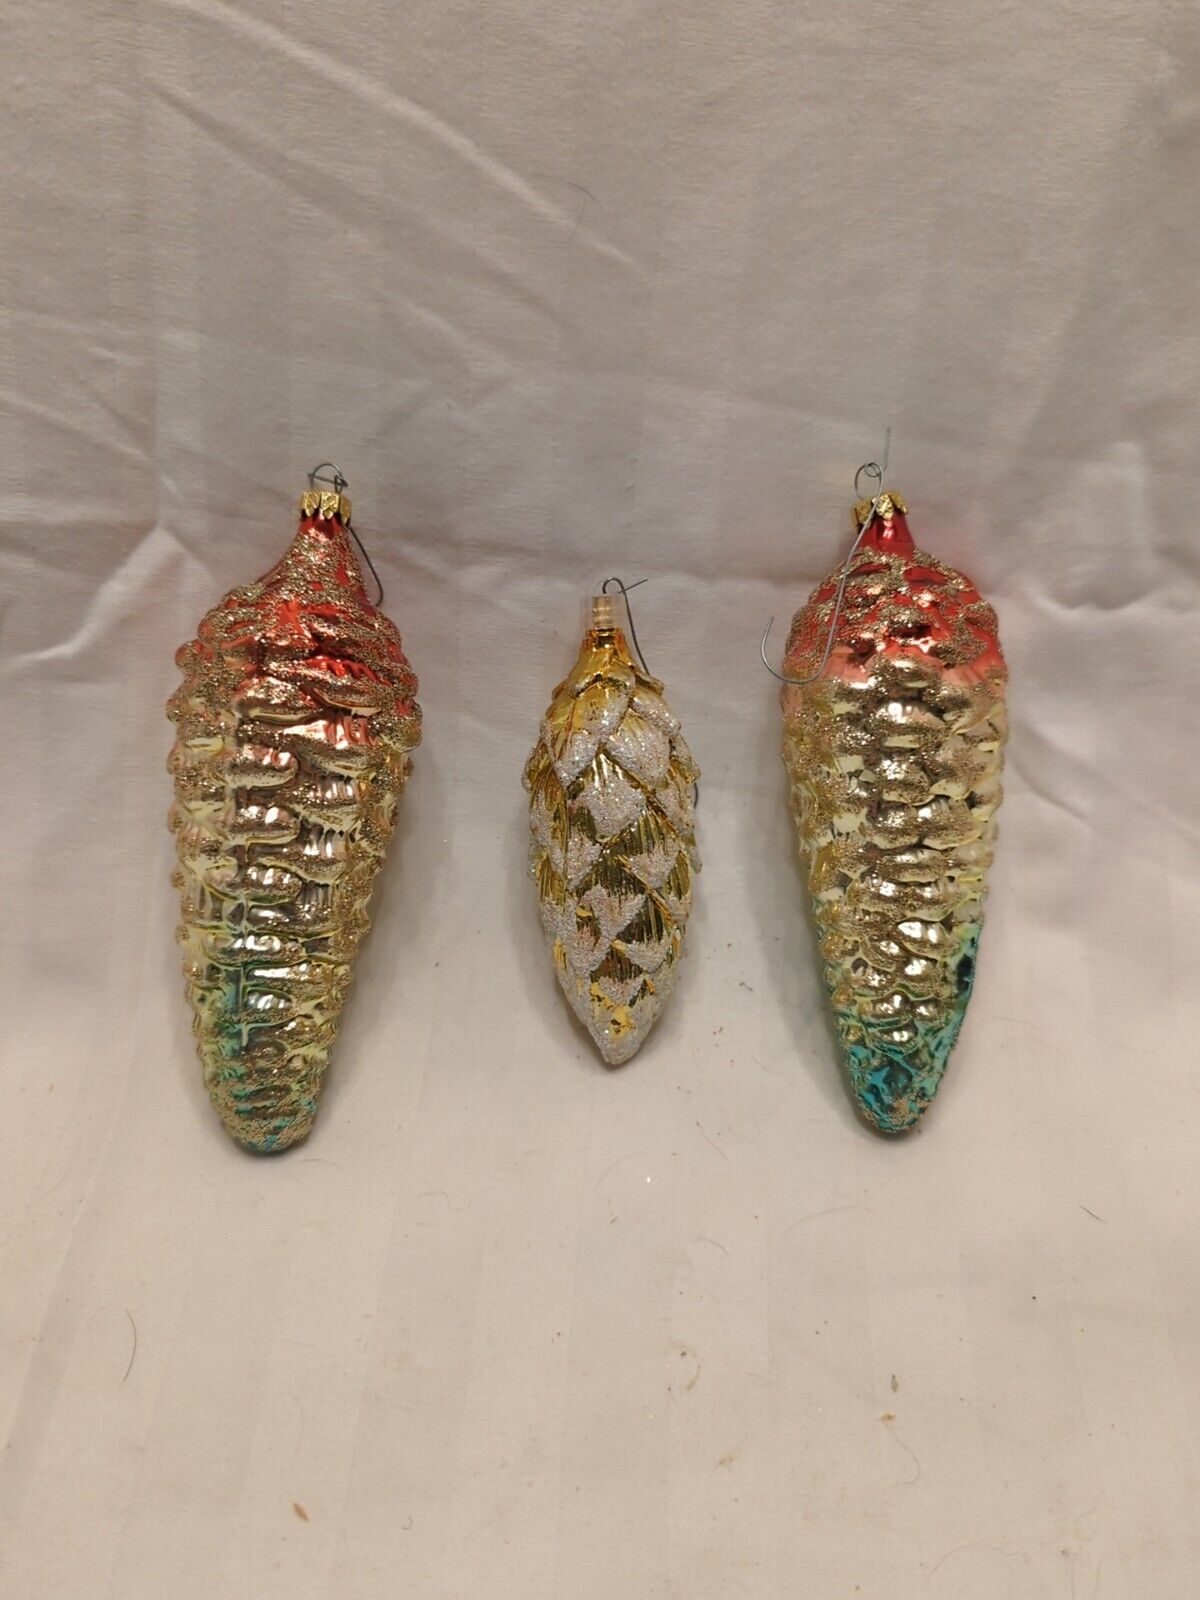 Vintage Blown Glass Pinecone Christmas Ornaments Lot Of 3